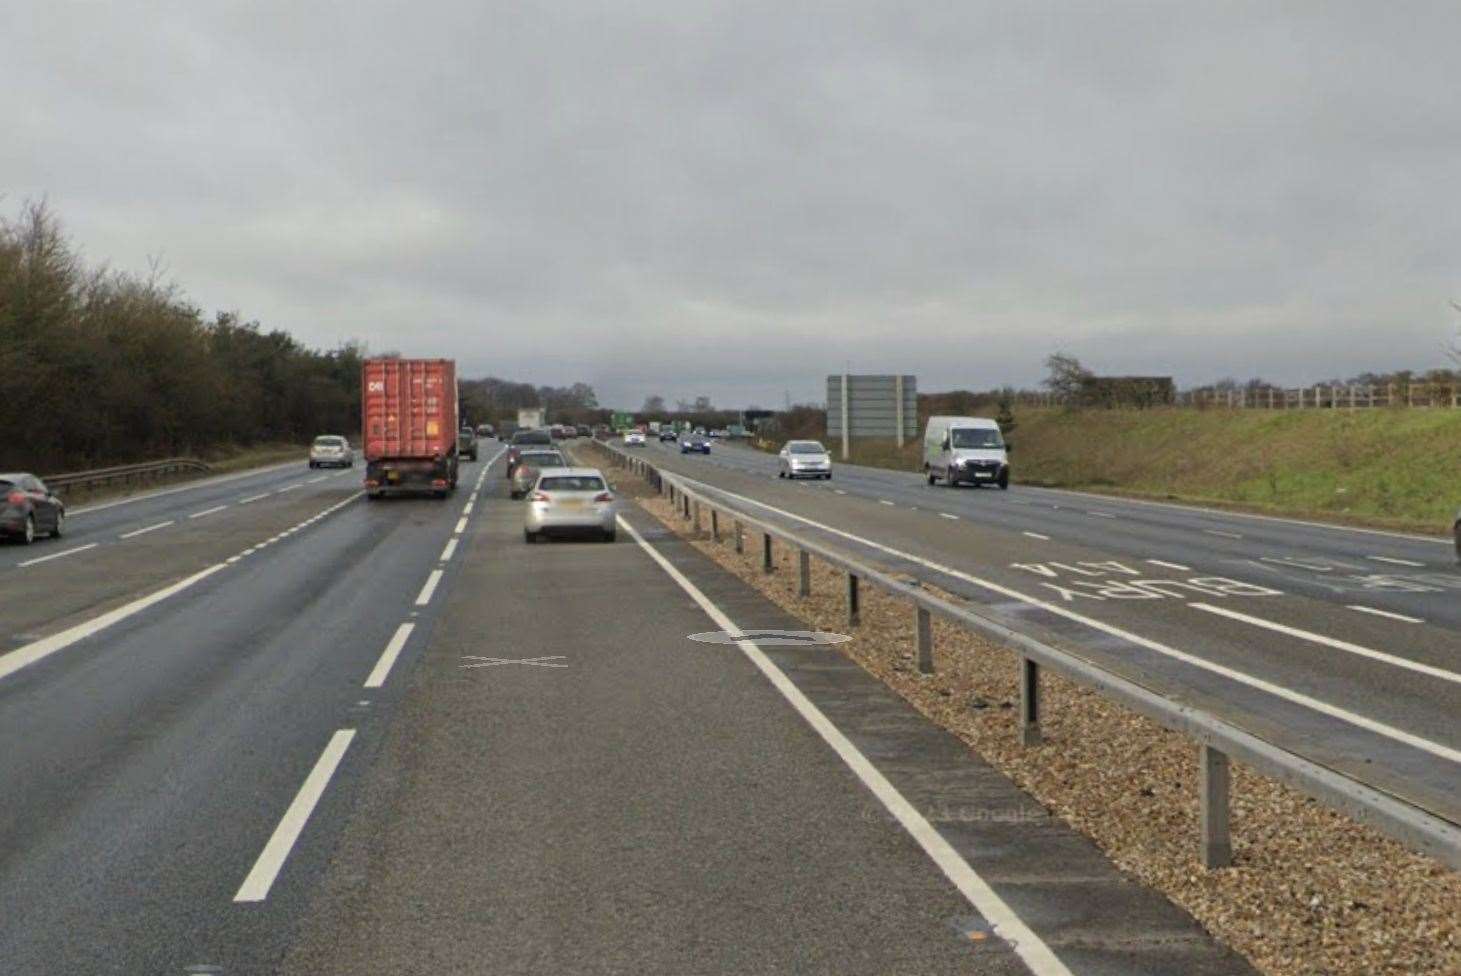 The collision occurred on the A14 near Chippenham. Photo: Google Maps